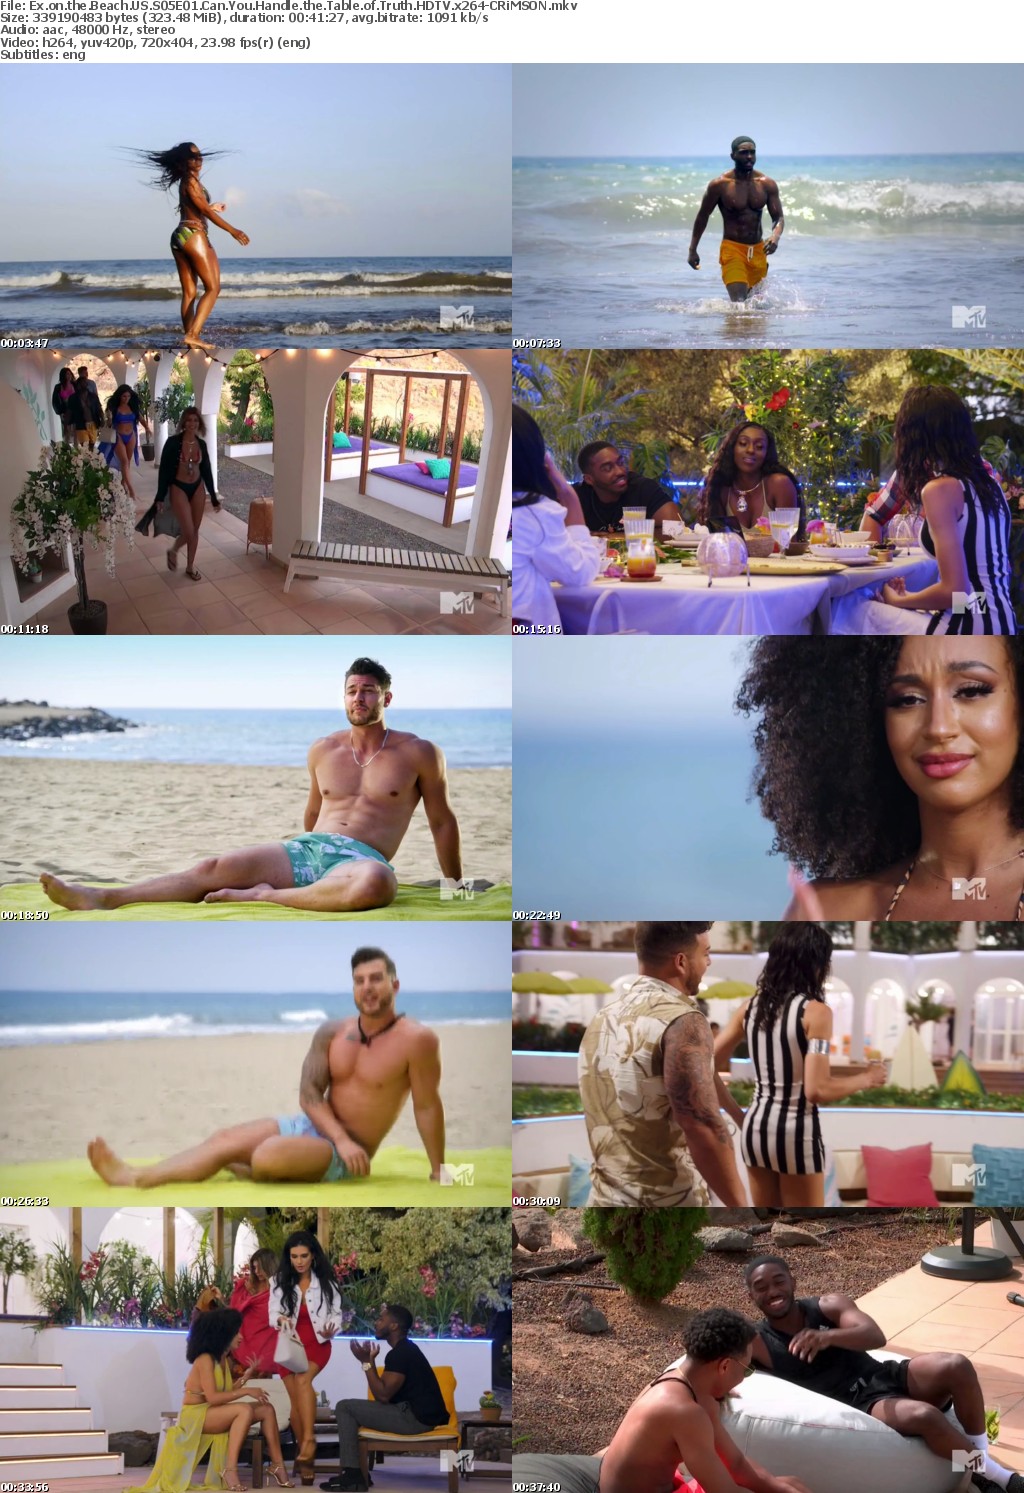 Ex on the Beach US S05E01 Can You Handle the Table of Truth HDTV x264-CRiMSON